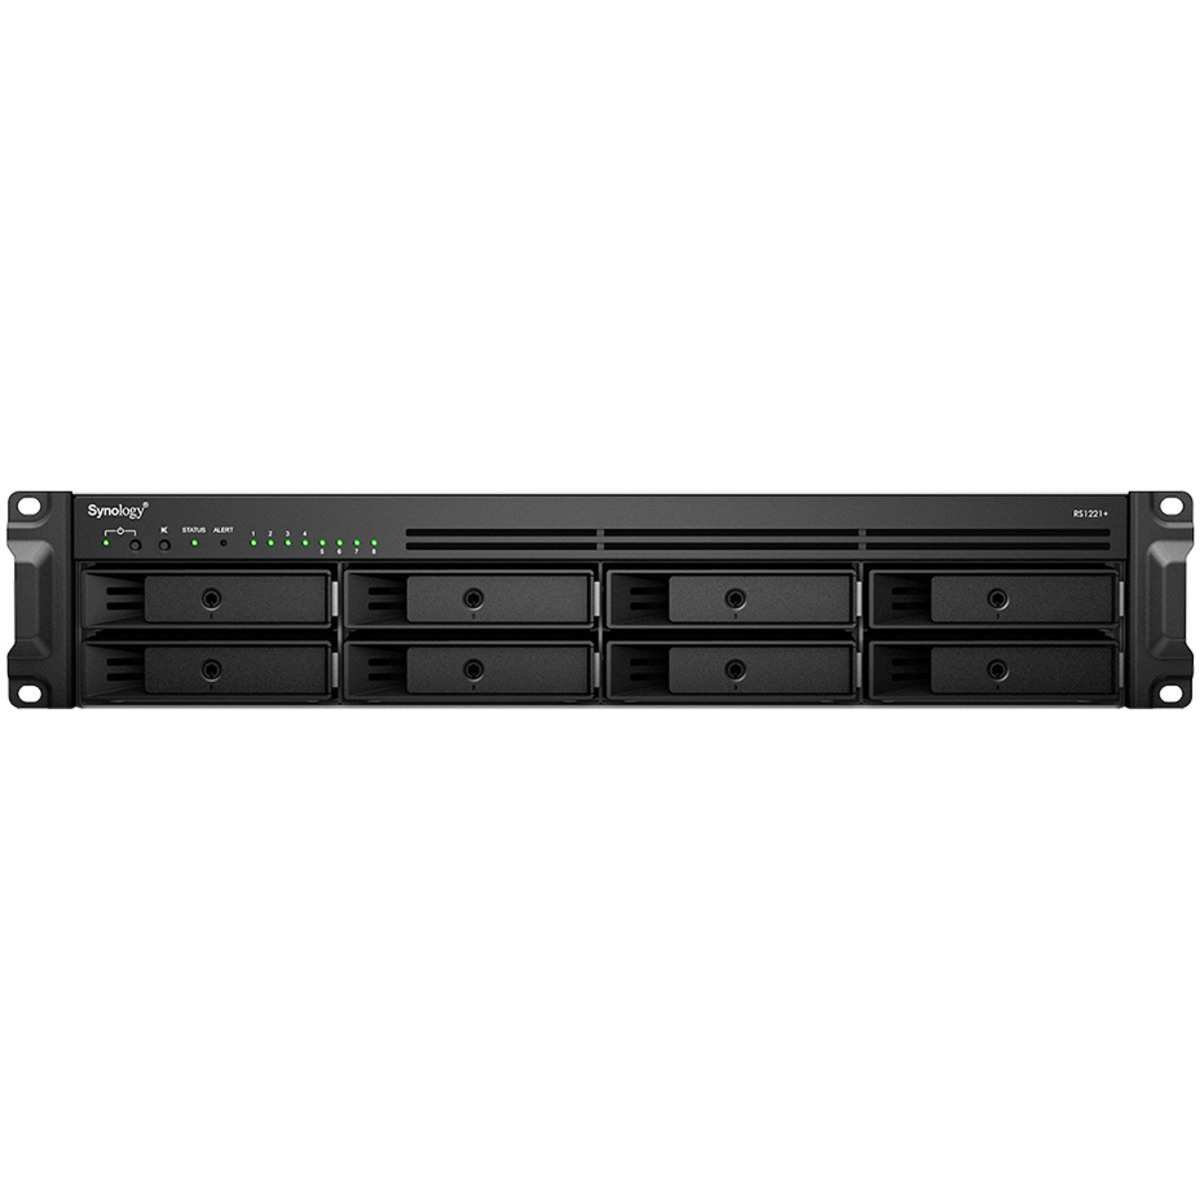 Synology RackStation RS1221RP+ 40tb 8-Bay RackMount Multimedia / Power User / Business NAS - Network Attached Storage Device 5x8tb Synology HAT5310 Series HAT5310-8T 3.5 7200rpm SATA 6Gb/s HDD ENTERPRISE Class Drives Installed - Burn-In Tested - FREE RAM UPGRADE RackStation RS1221RP+